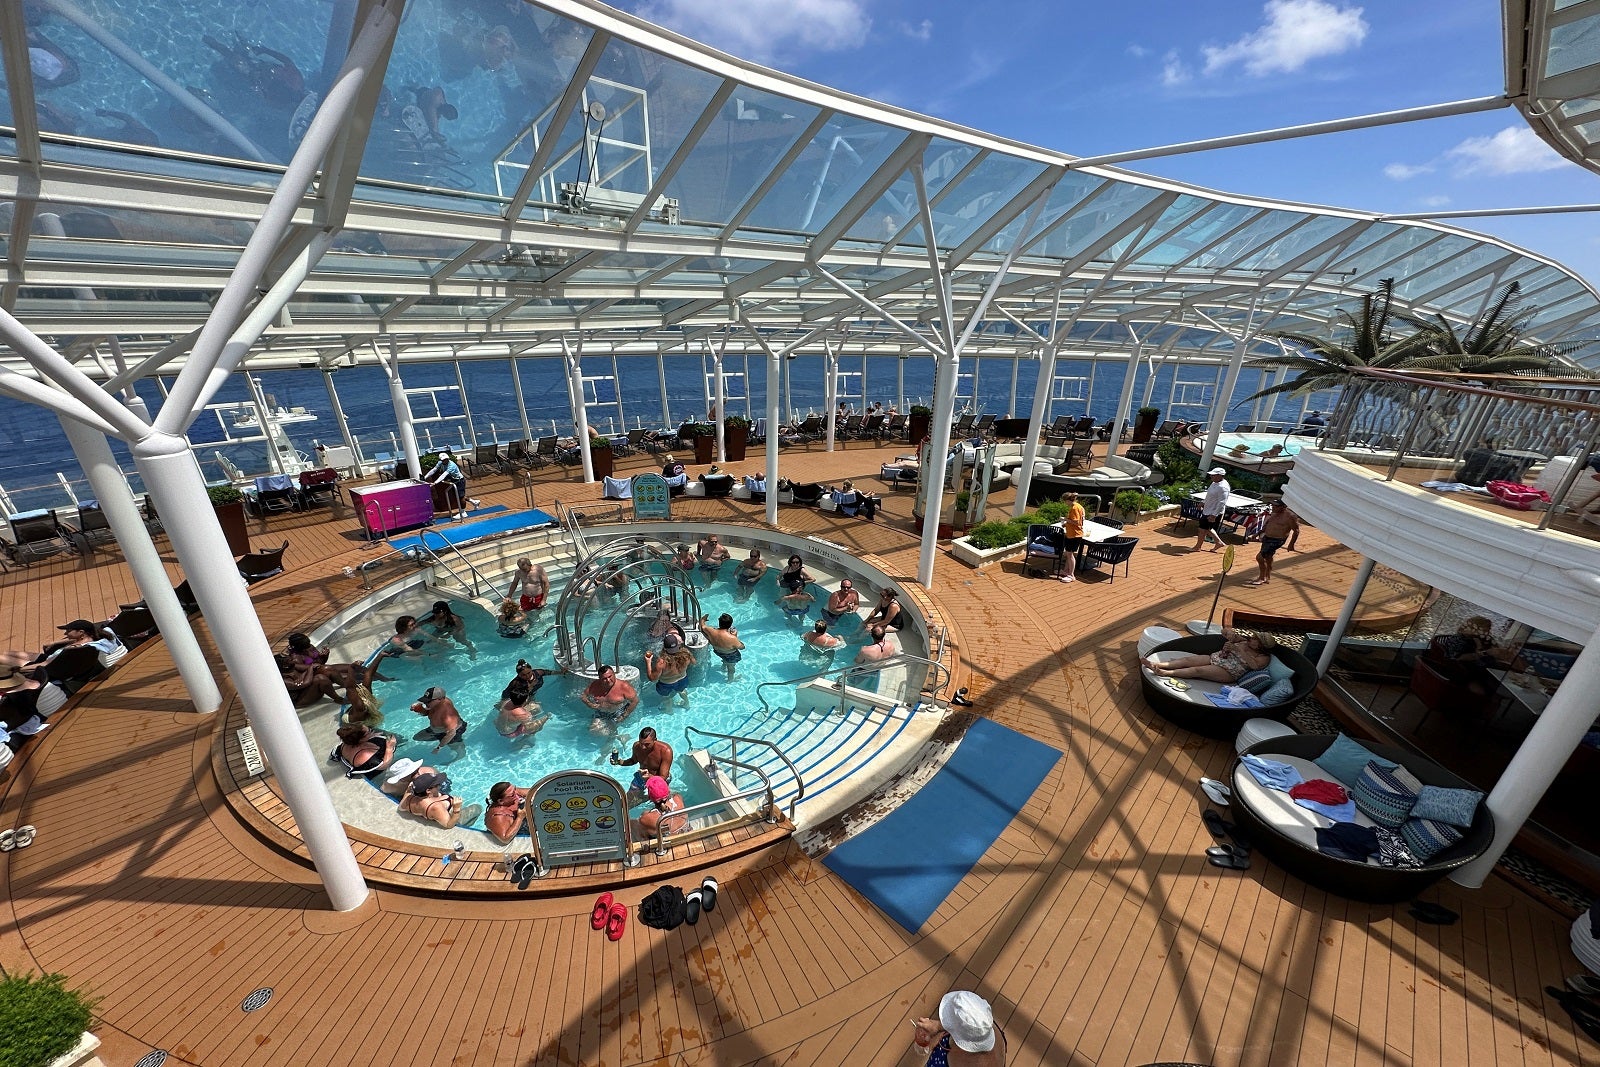 Cruise line to teens: Stay out of this area on our ships